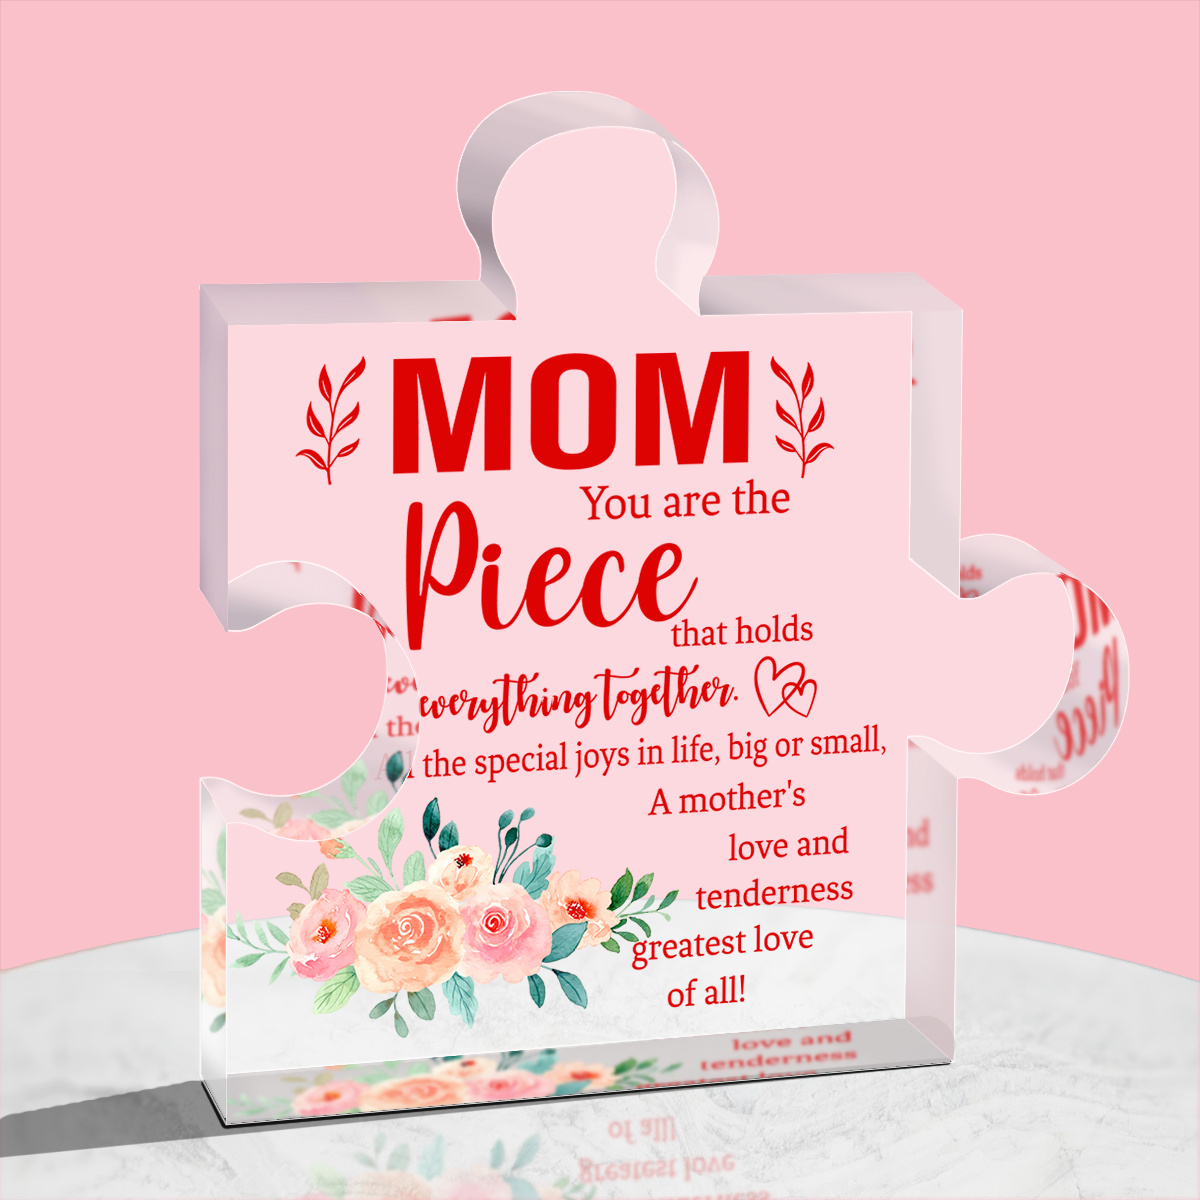 Gifts for Mom from Daughter Son - Mothers Day, Birthday, Christmas